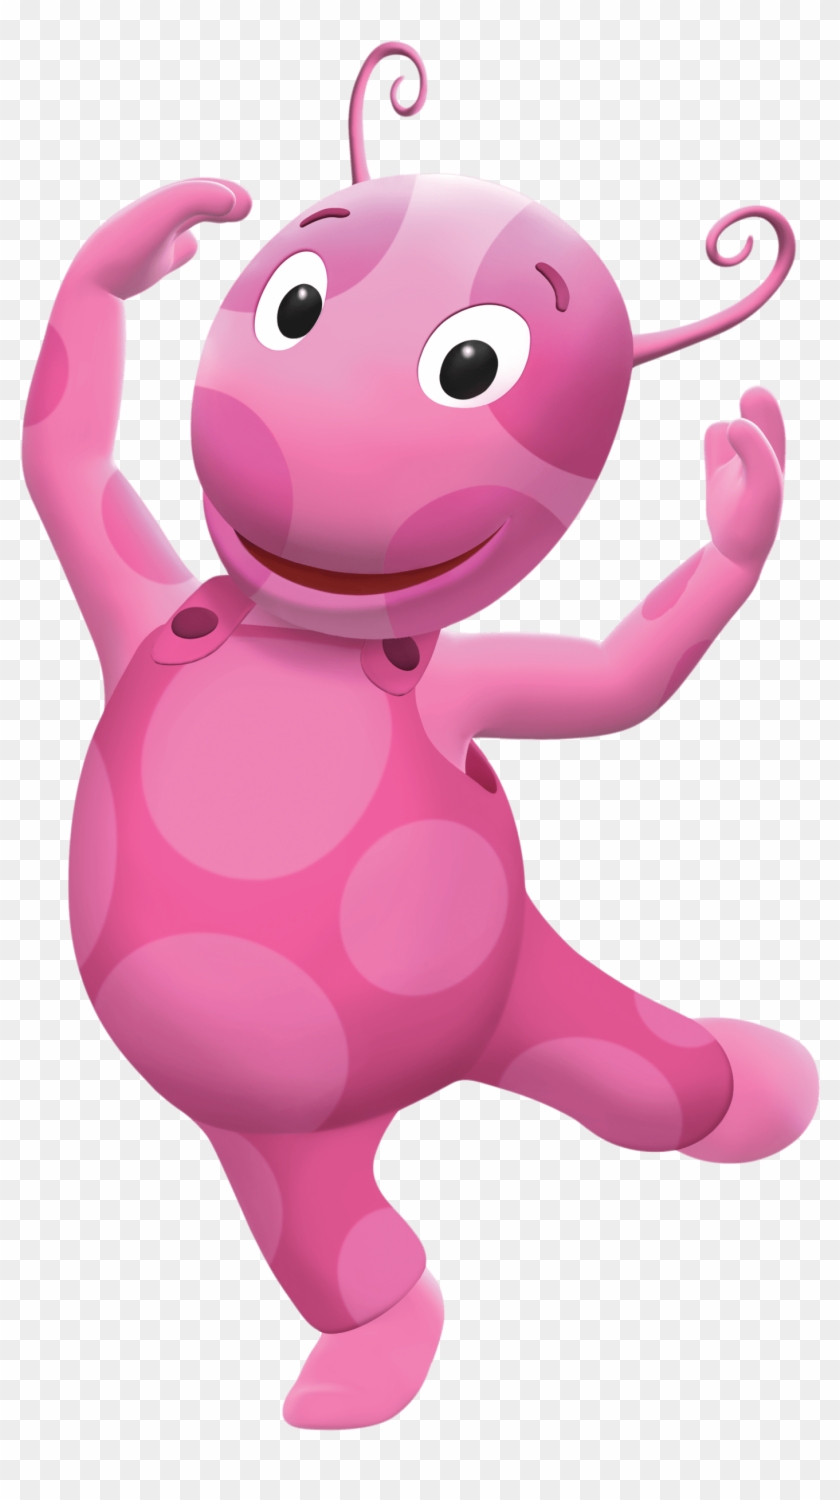 Download - Pink Girl From Backyardigans Clipart #5283012